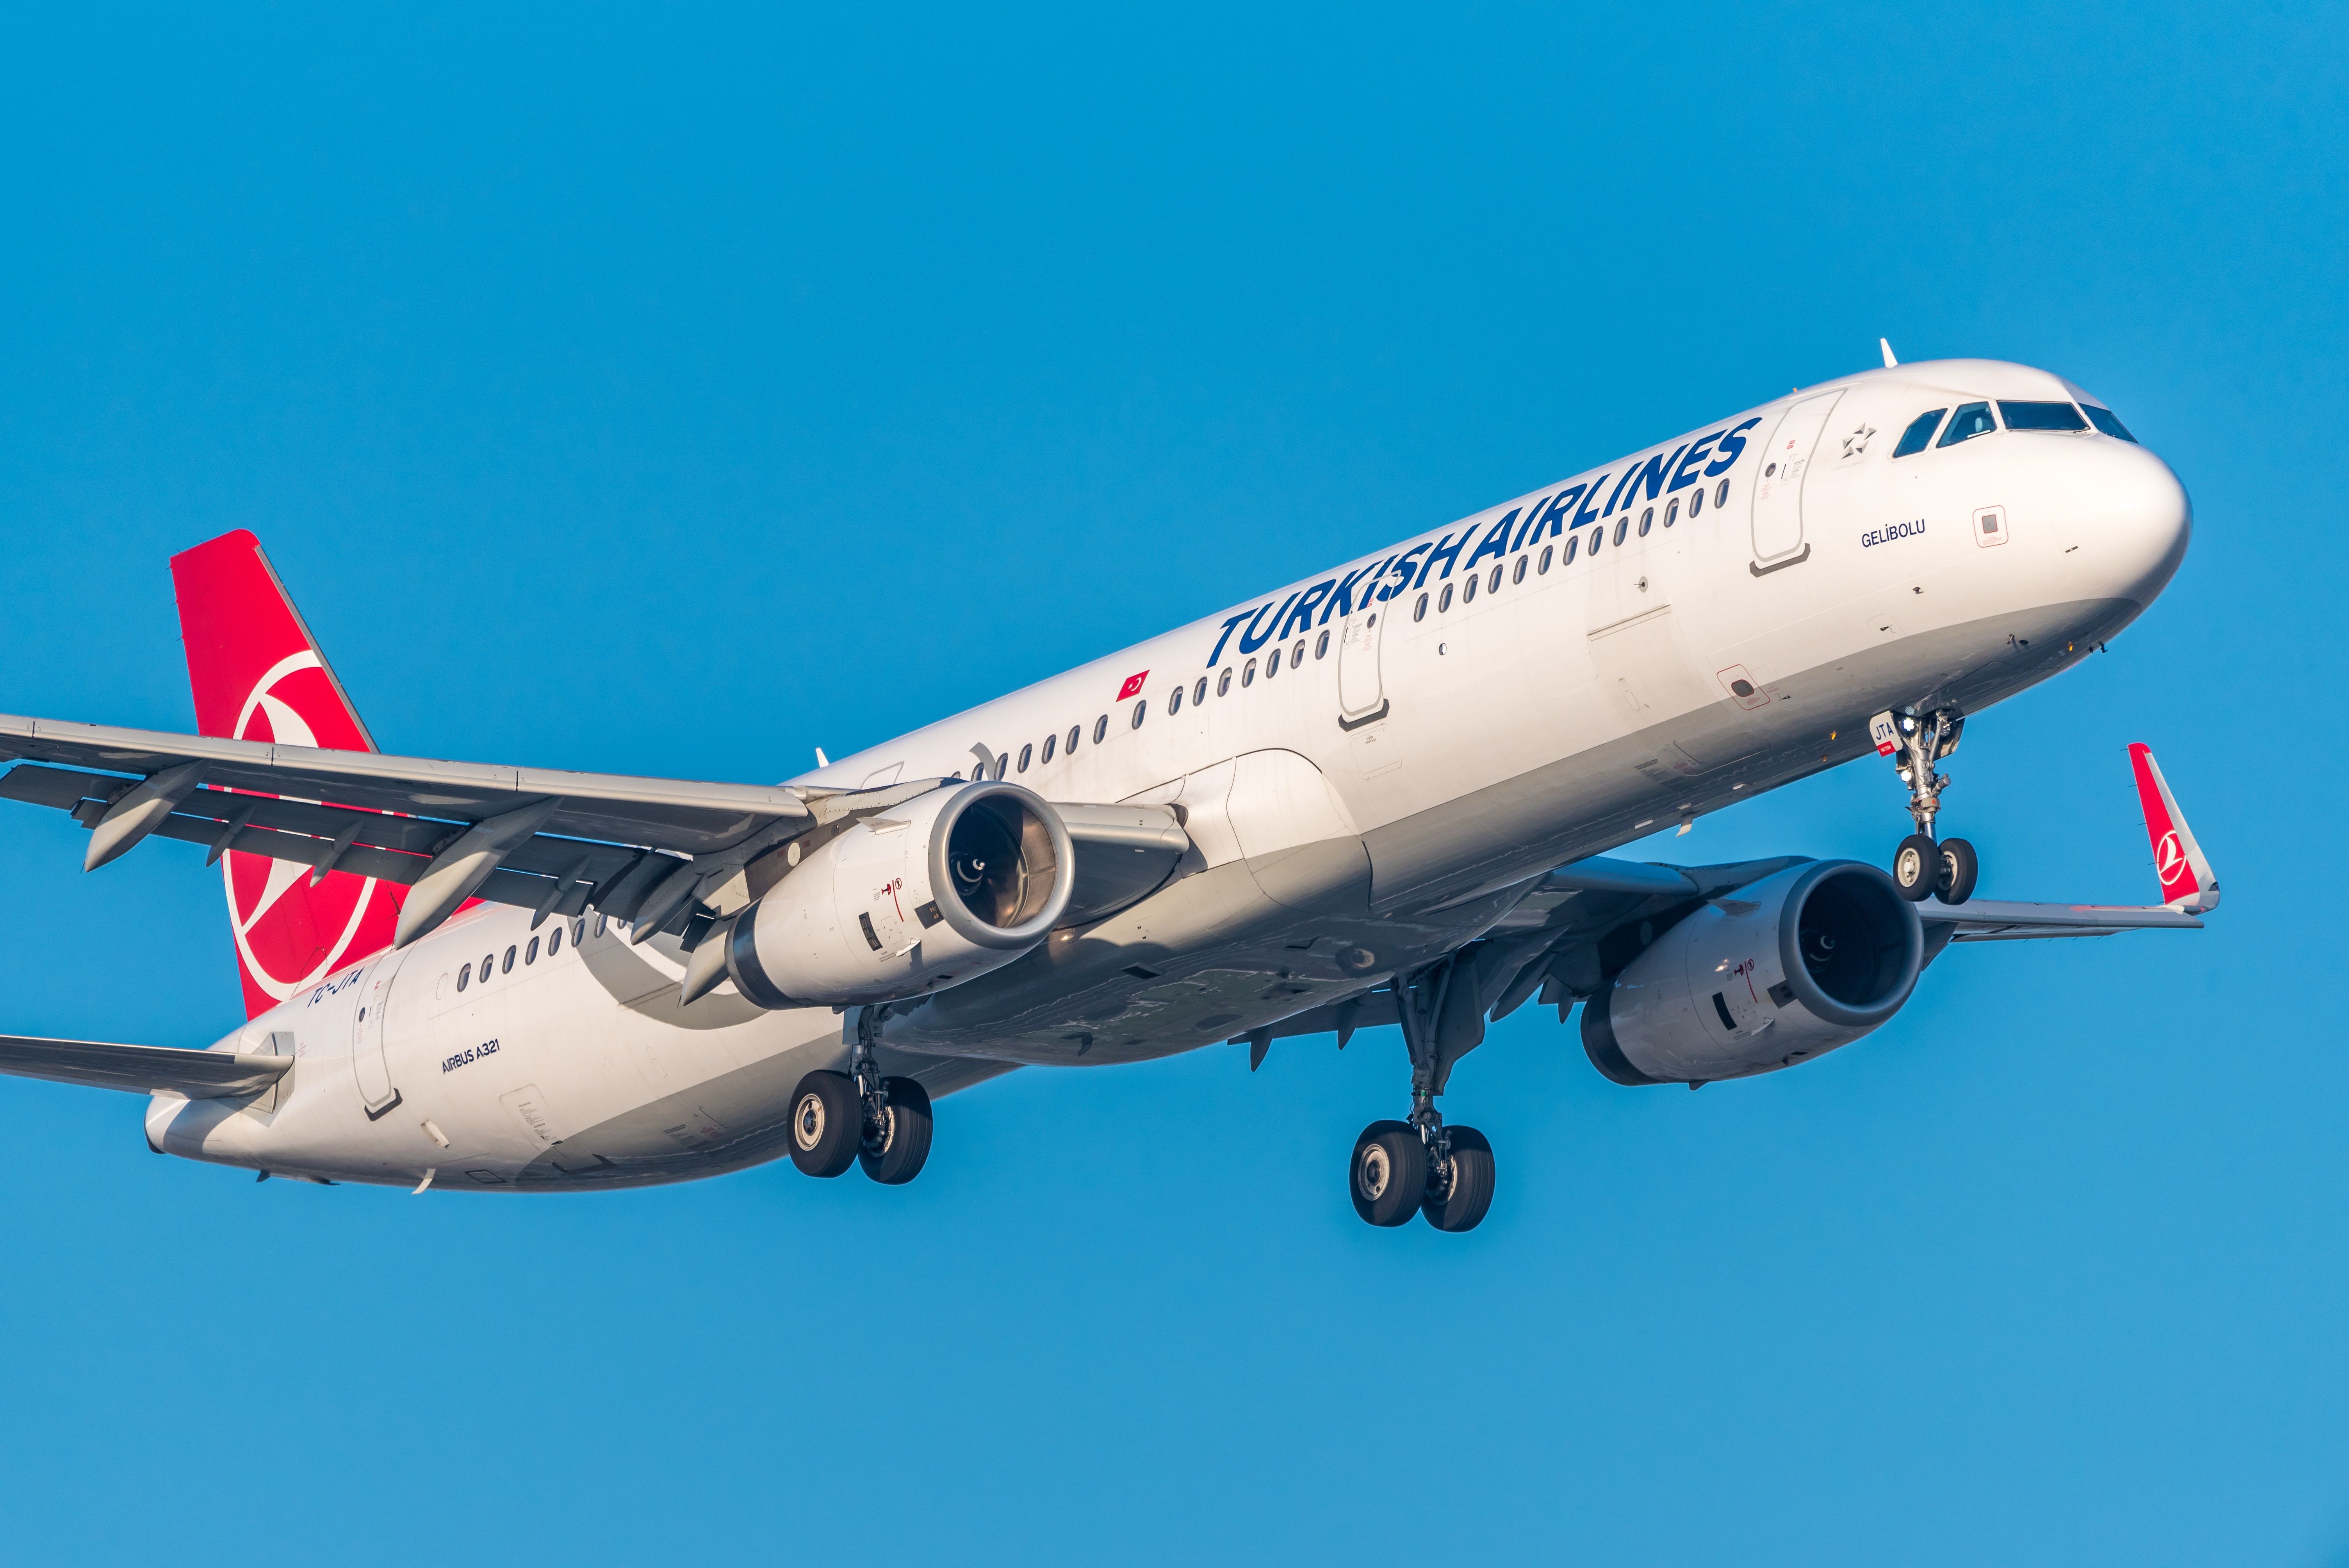 Turkish Airlines A321ceo landing